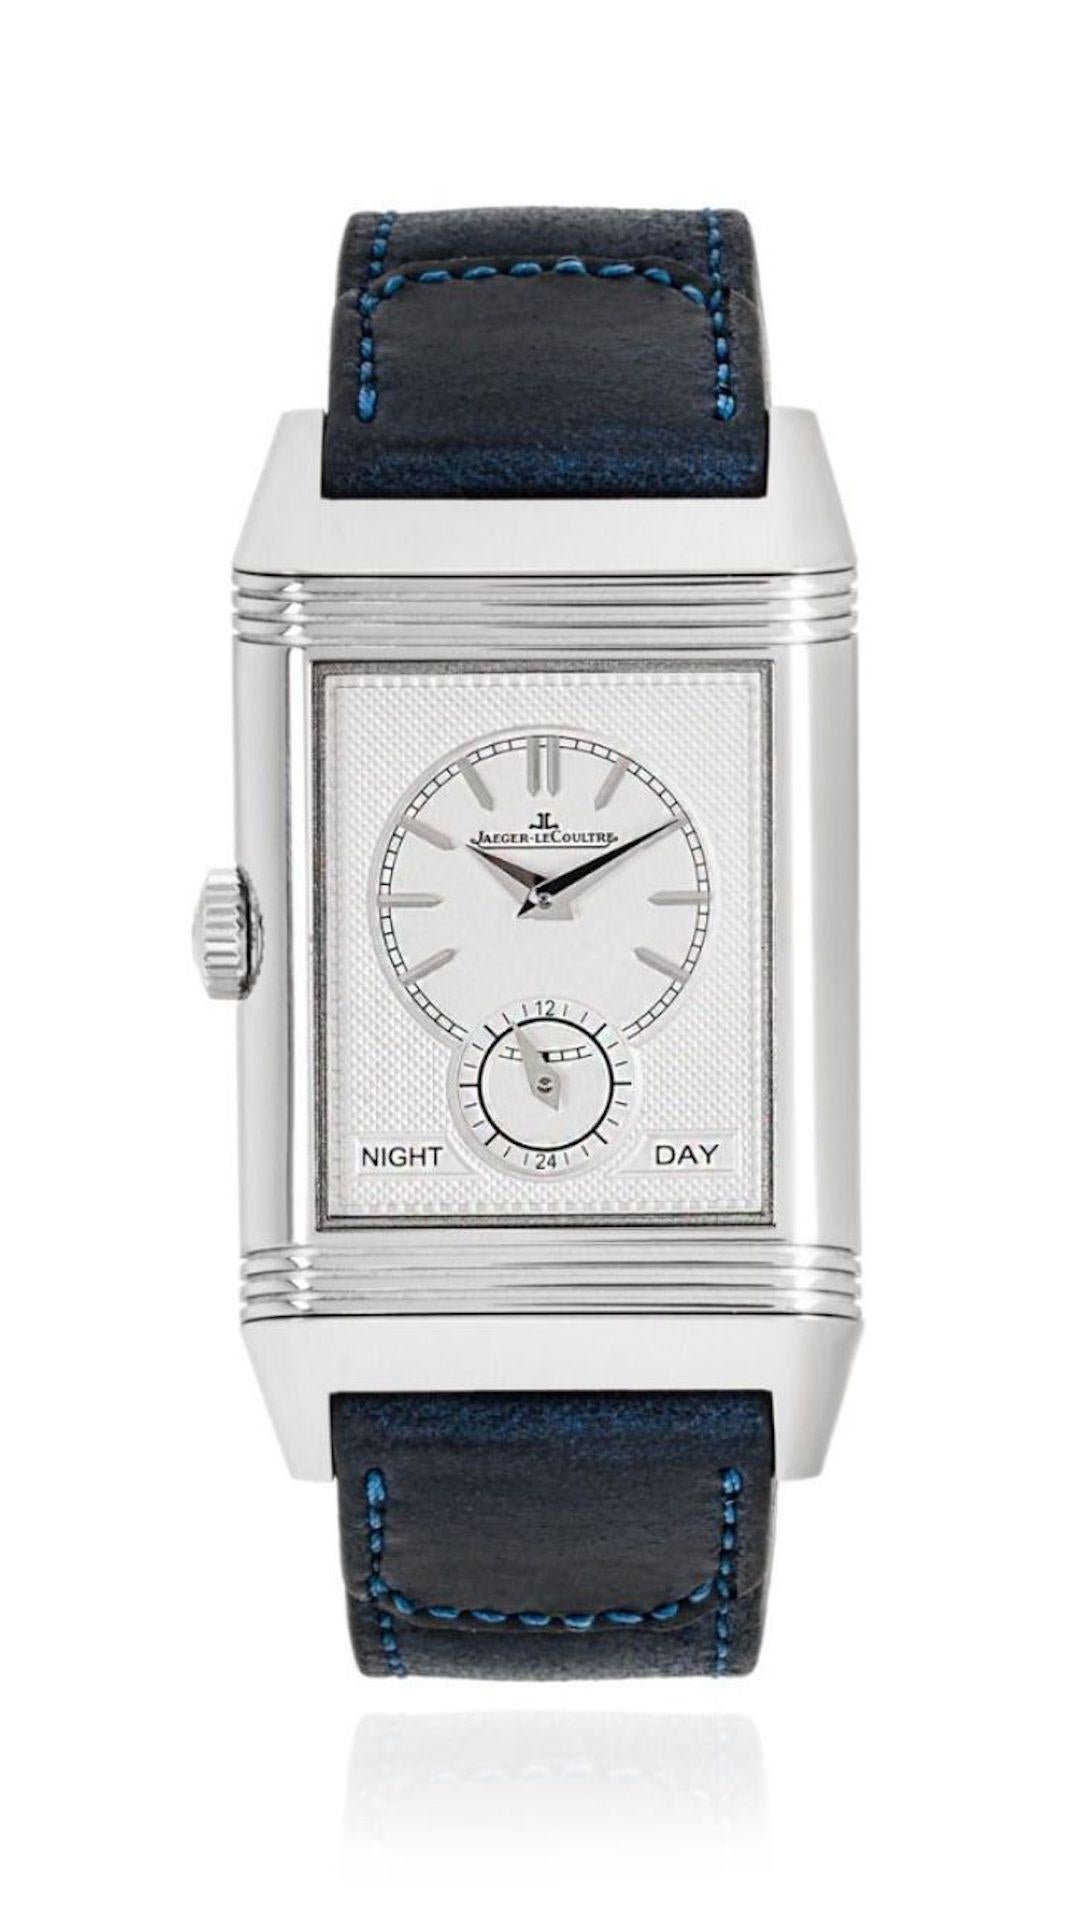 A stainless steel Jaeger LeCoultre Reverso Tribute Duoface. Featuring a blue dial with applied hour markers, a small seconds sub-dial and a reversible side which features a silver dial and displays two time zones, as well as a practical day/night